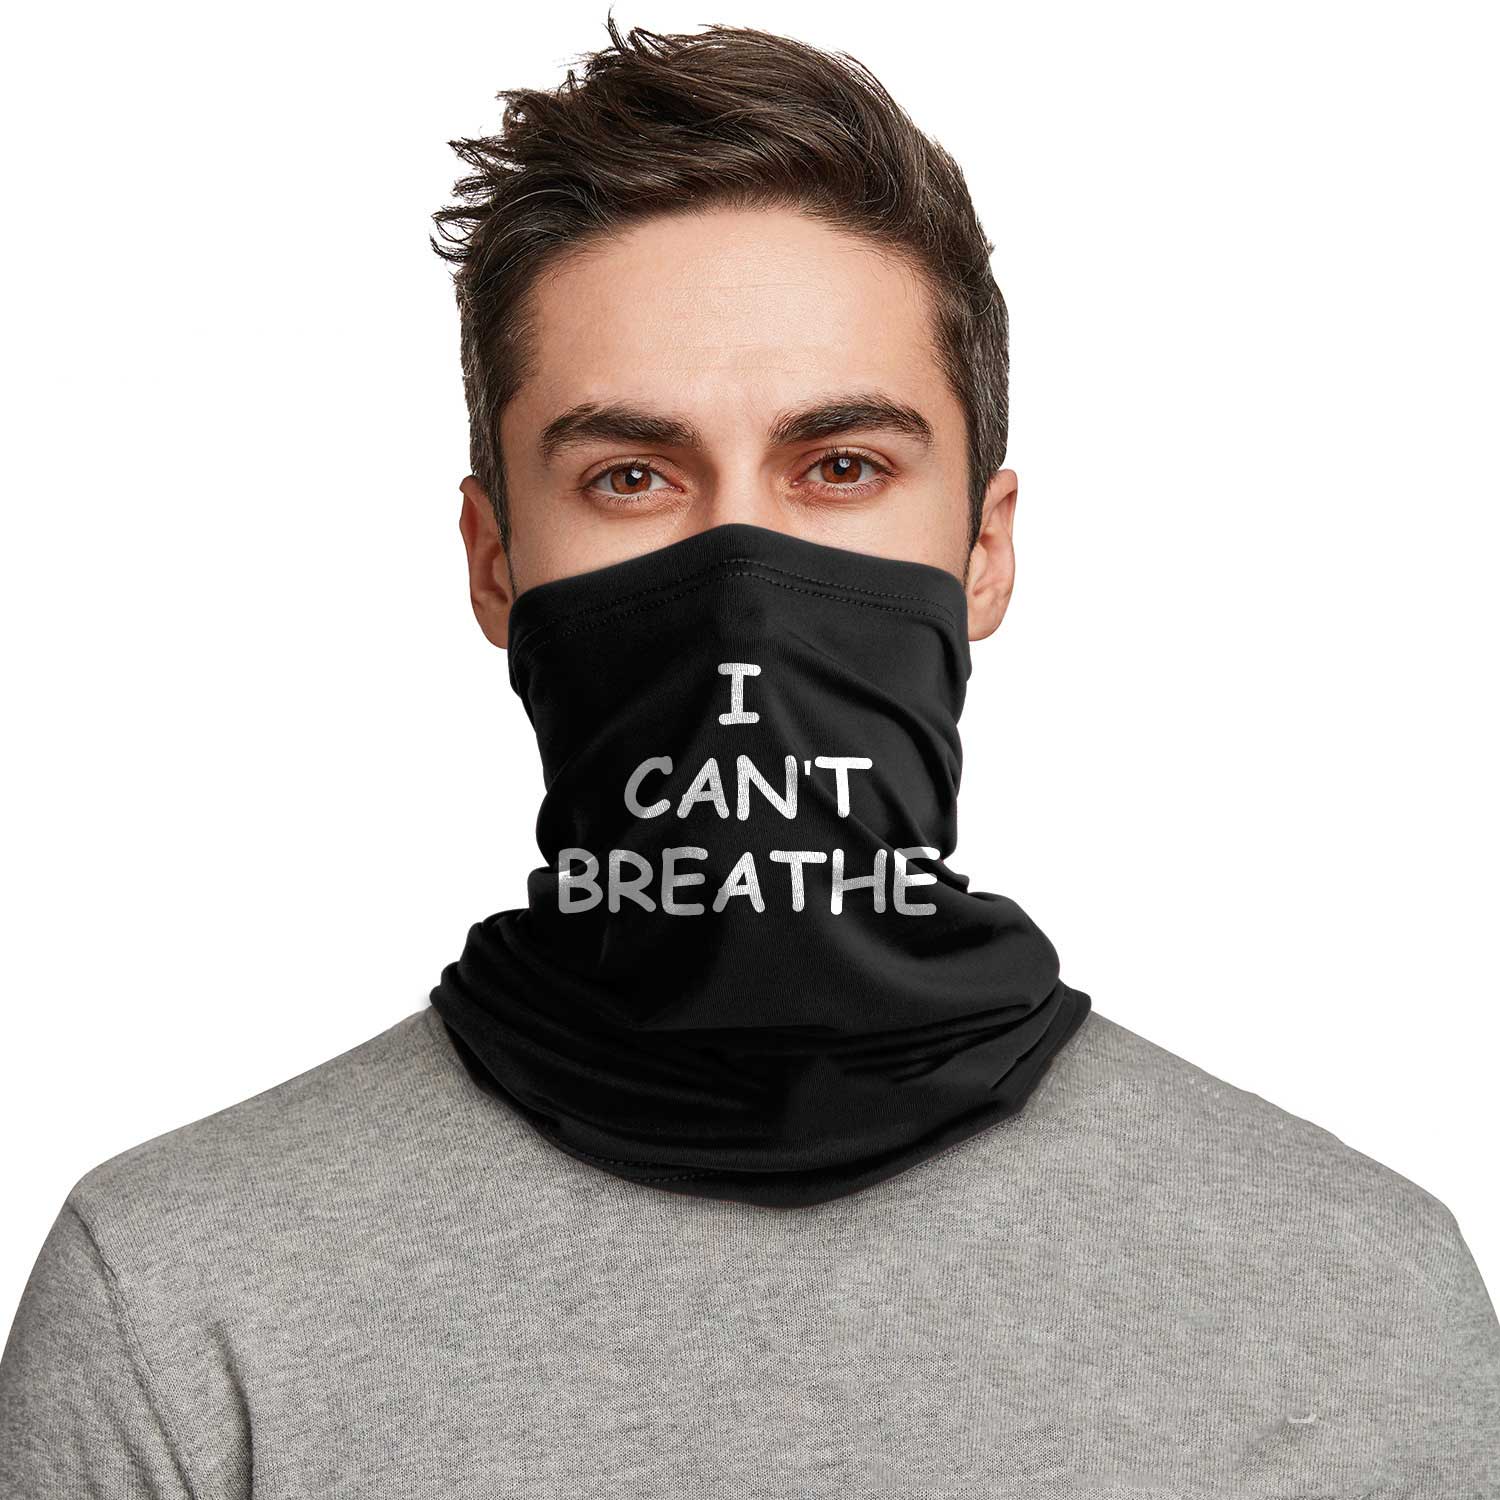 I Can't Breathe Outdoor Mouth Mask Windproof Sports Face Mask Dust Shield Scarf Men Woman Neck Warmer